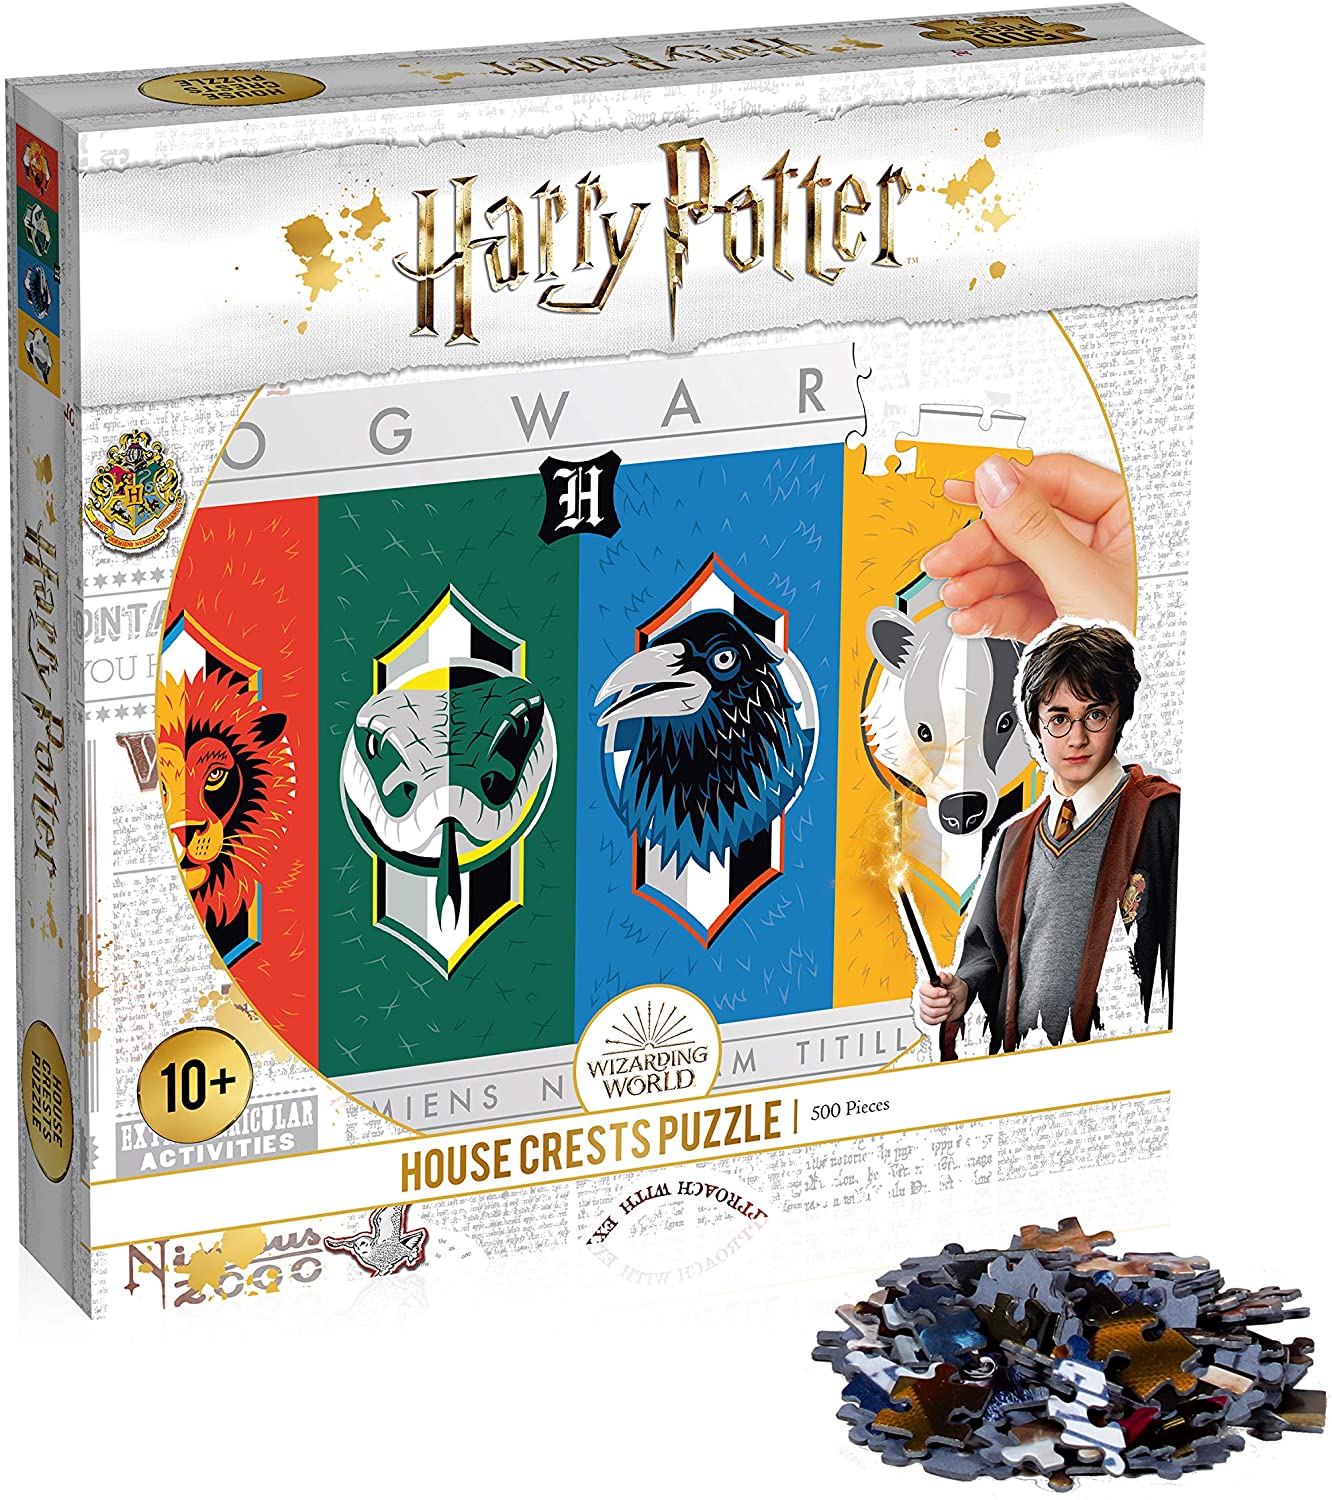 Harry Potter House Crests 500 Piece Jigsaw Puzzle Game